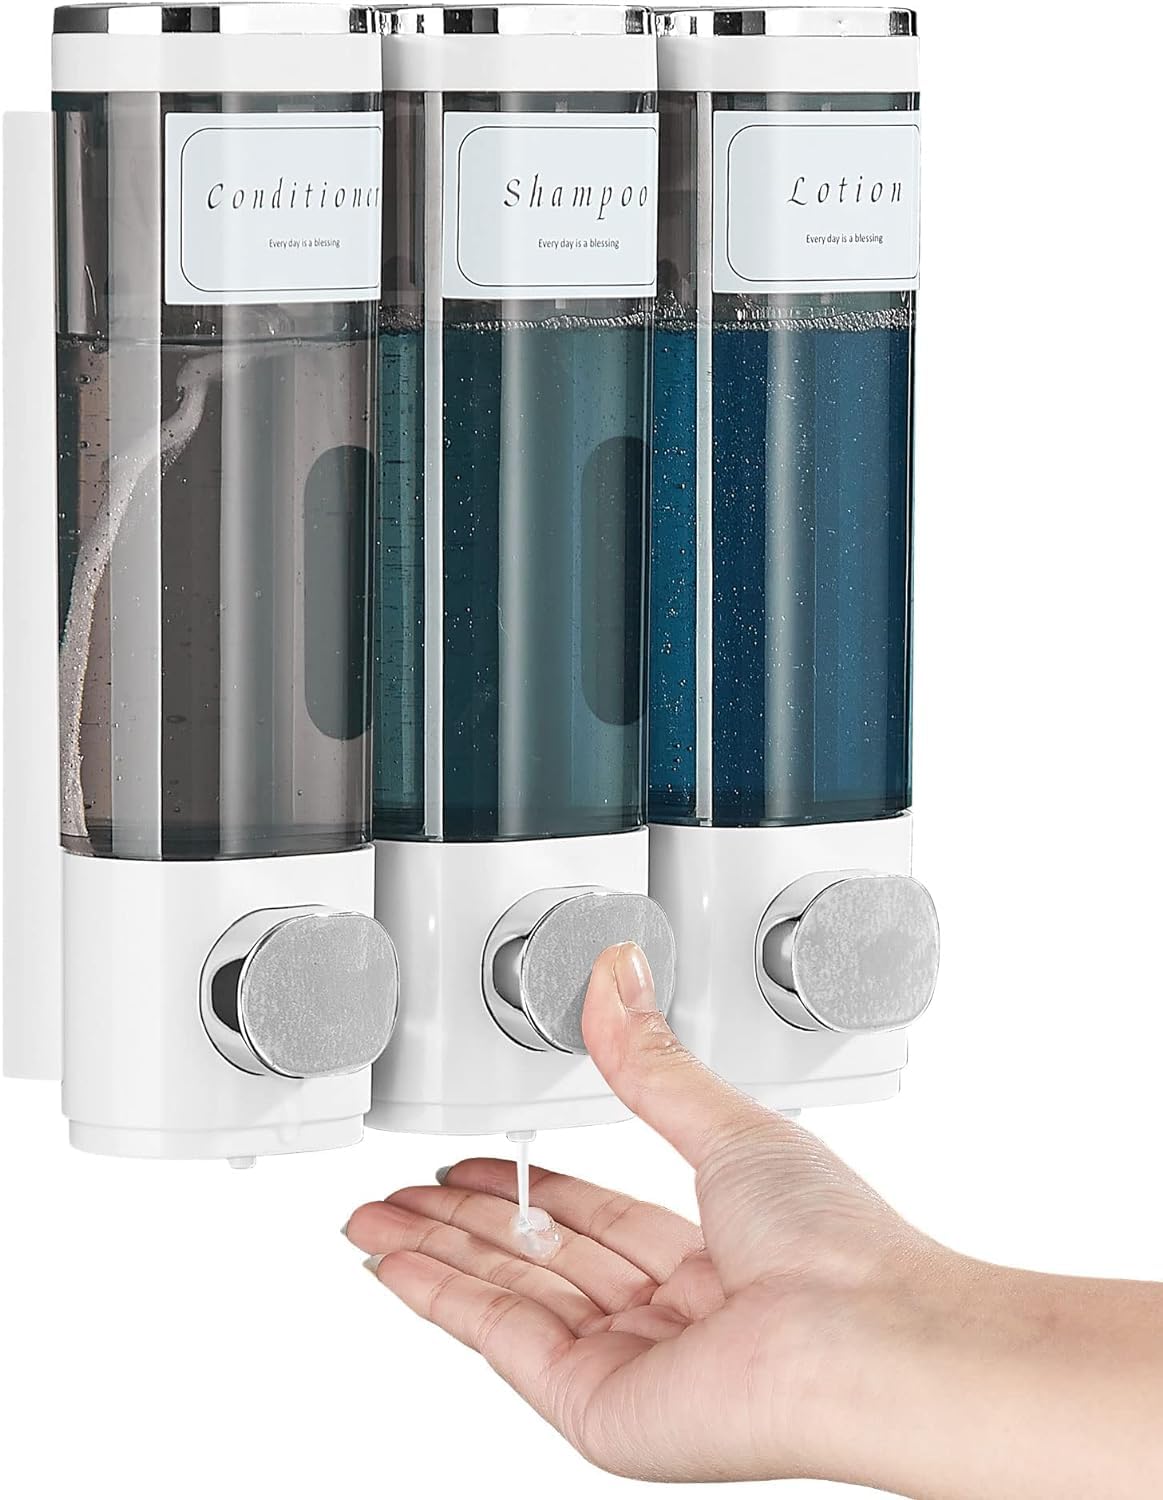 3 in 1 Shampoo and Conditioner Dispenser wall, Shower Dispenser 3 Chamber No Drill, White Bathroom Soap Dispenser and Labels